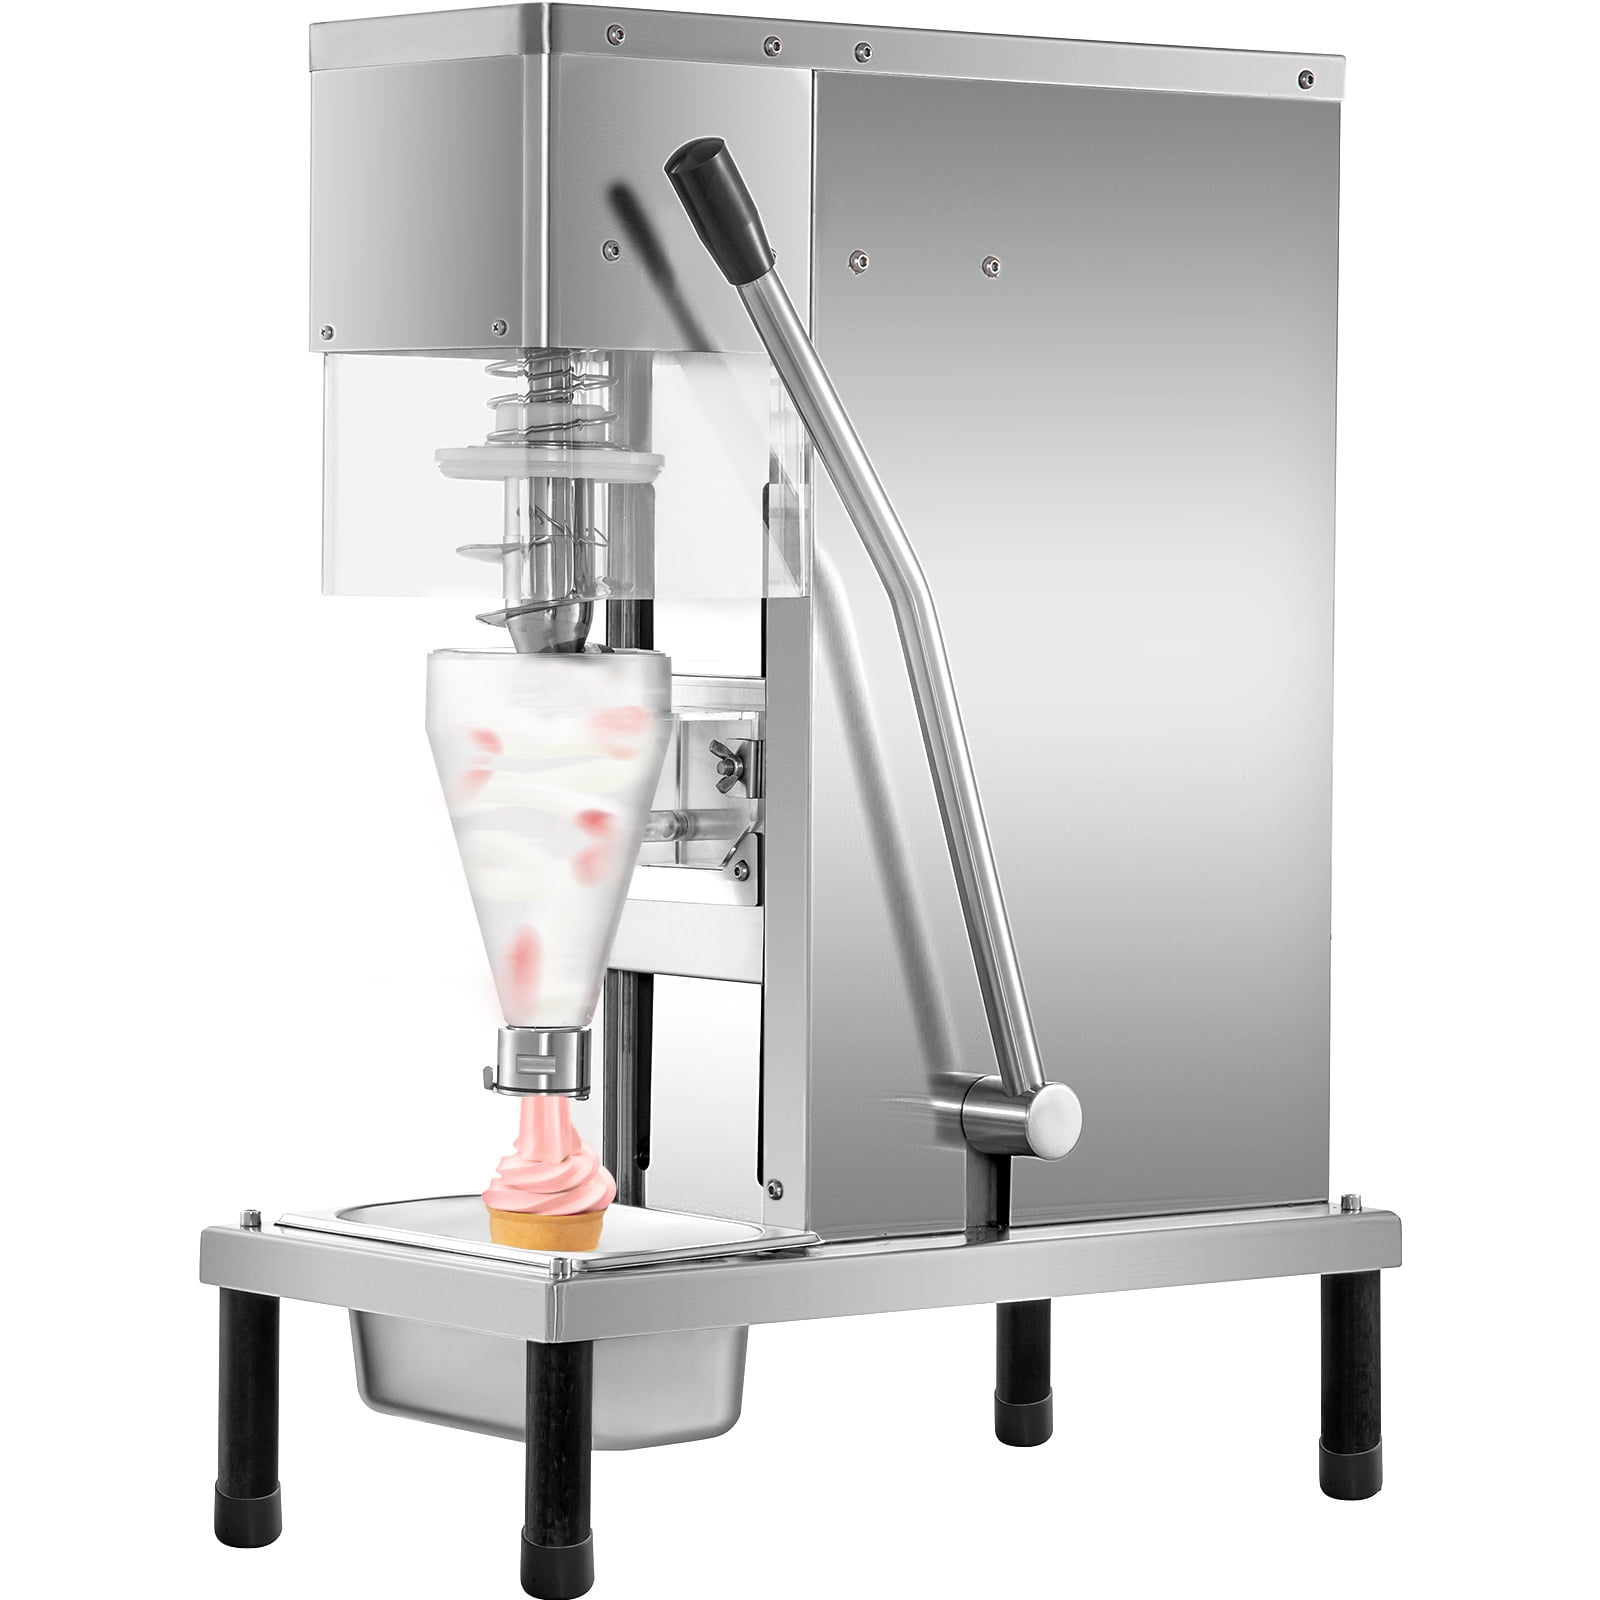 VEVOR Upright Automatic Ice Cream Maker with Built-in Compressor, 2 Quart No Pre-freezing Fruit Yogurt Machine, Stainless Steel Electric Sorbet